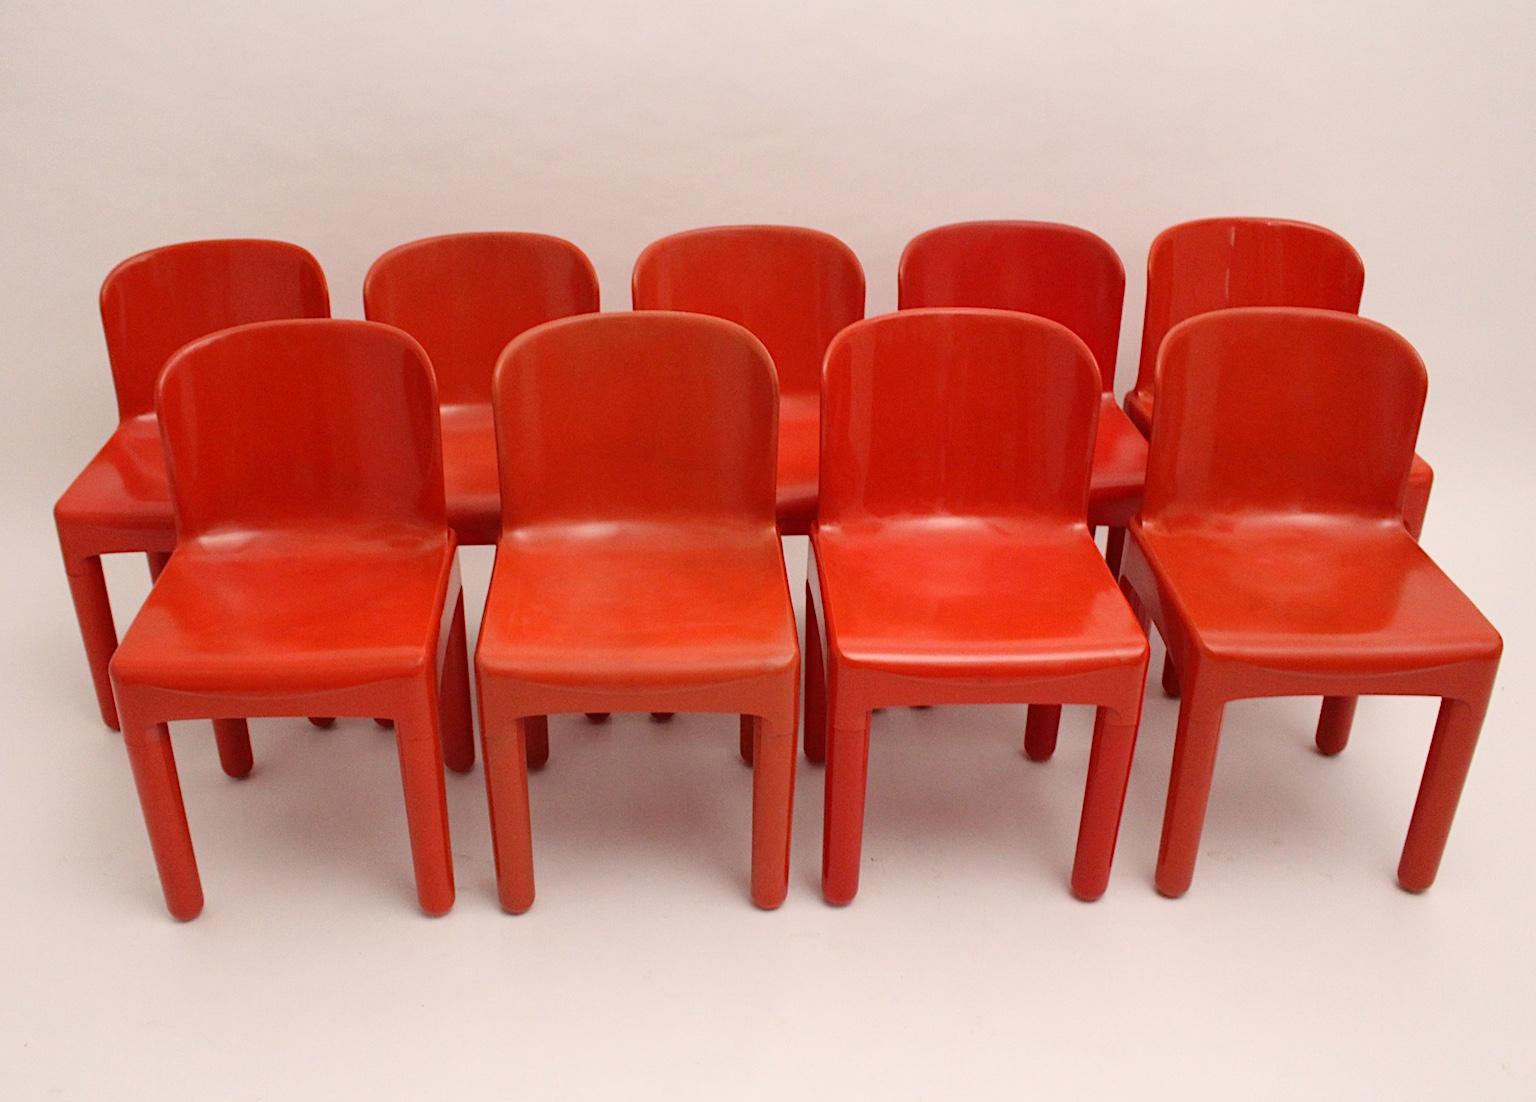 Space Age Vintage Eight Red Plastic Dining Chairs by Marcello Siard, Italy, 1969 For Sale 1